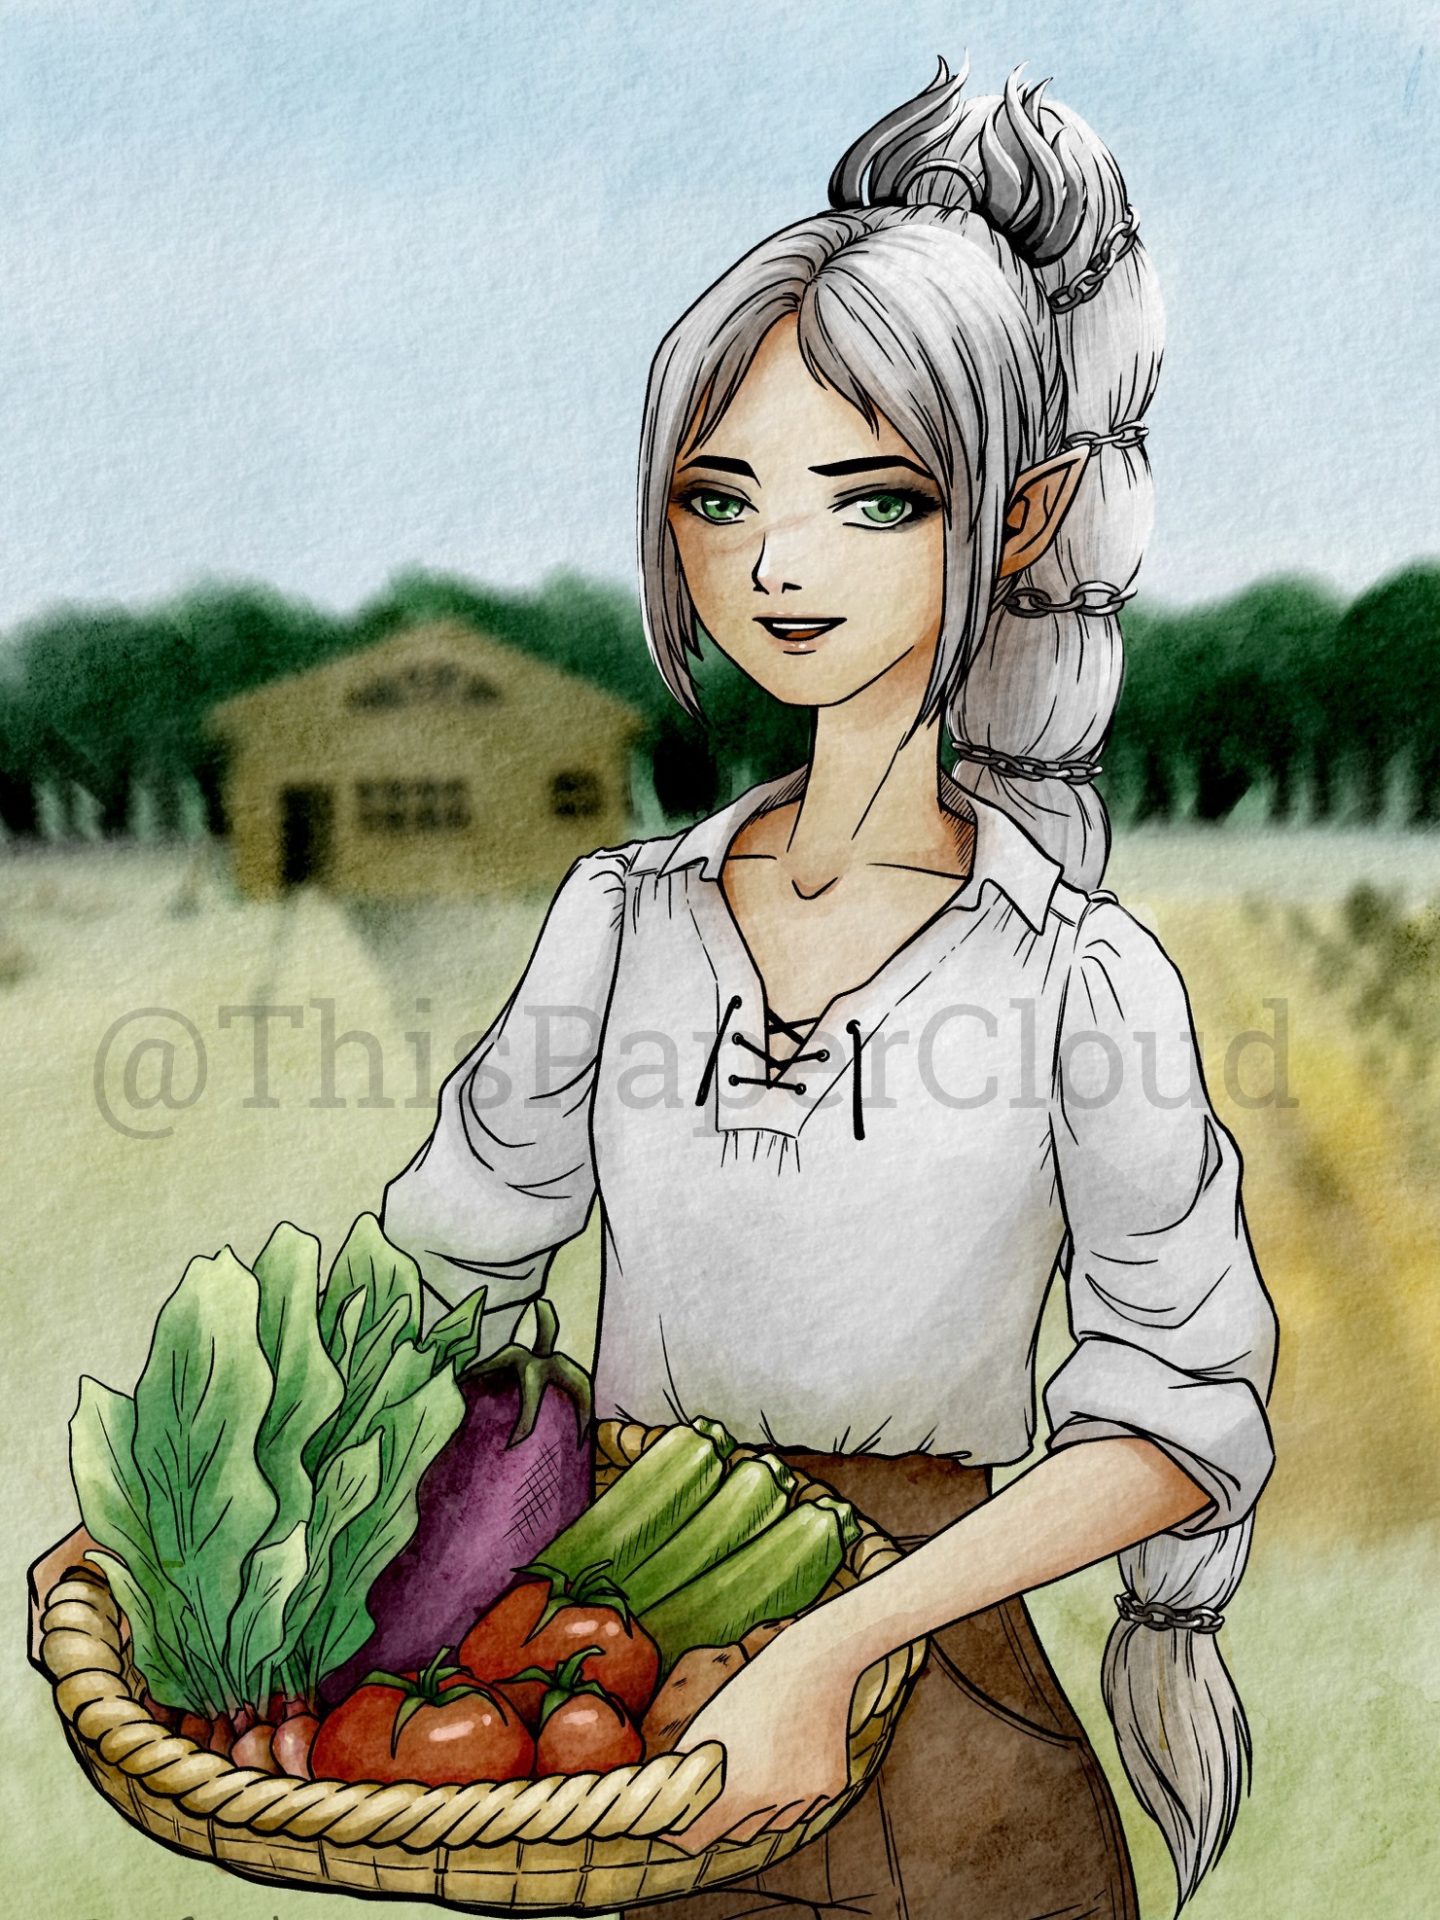 The Baldur's Gate 3 character Shadowheart in a "cottage core" attire holding a basket of vegetables.